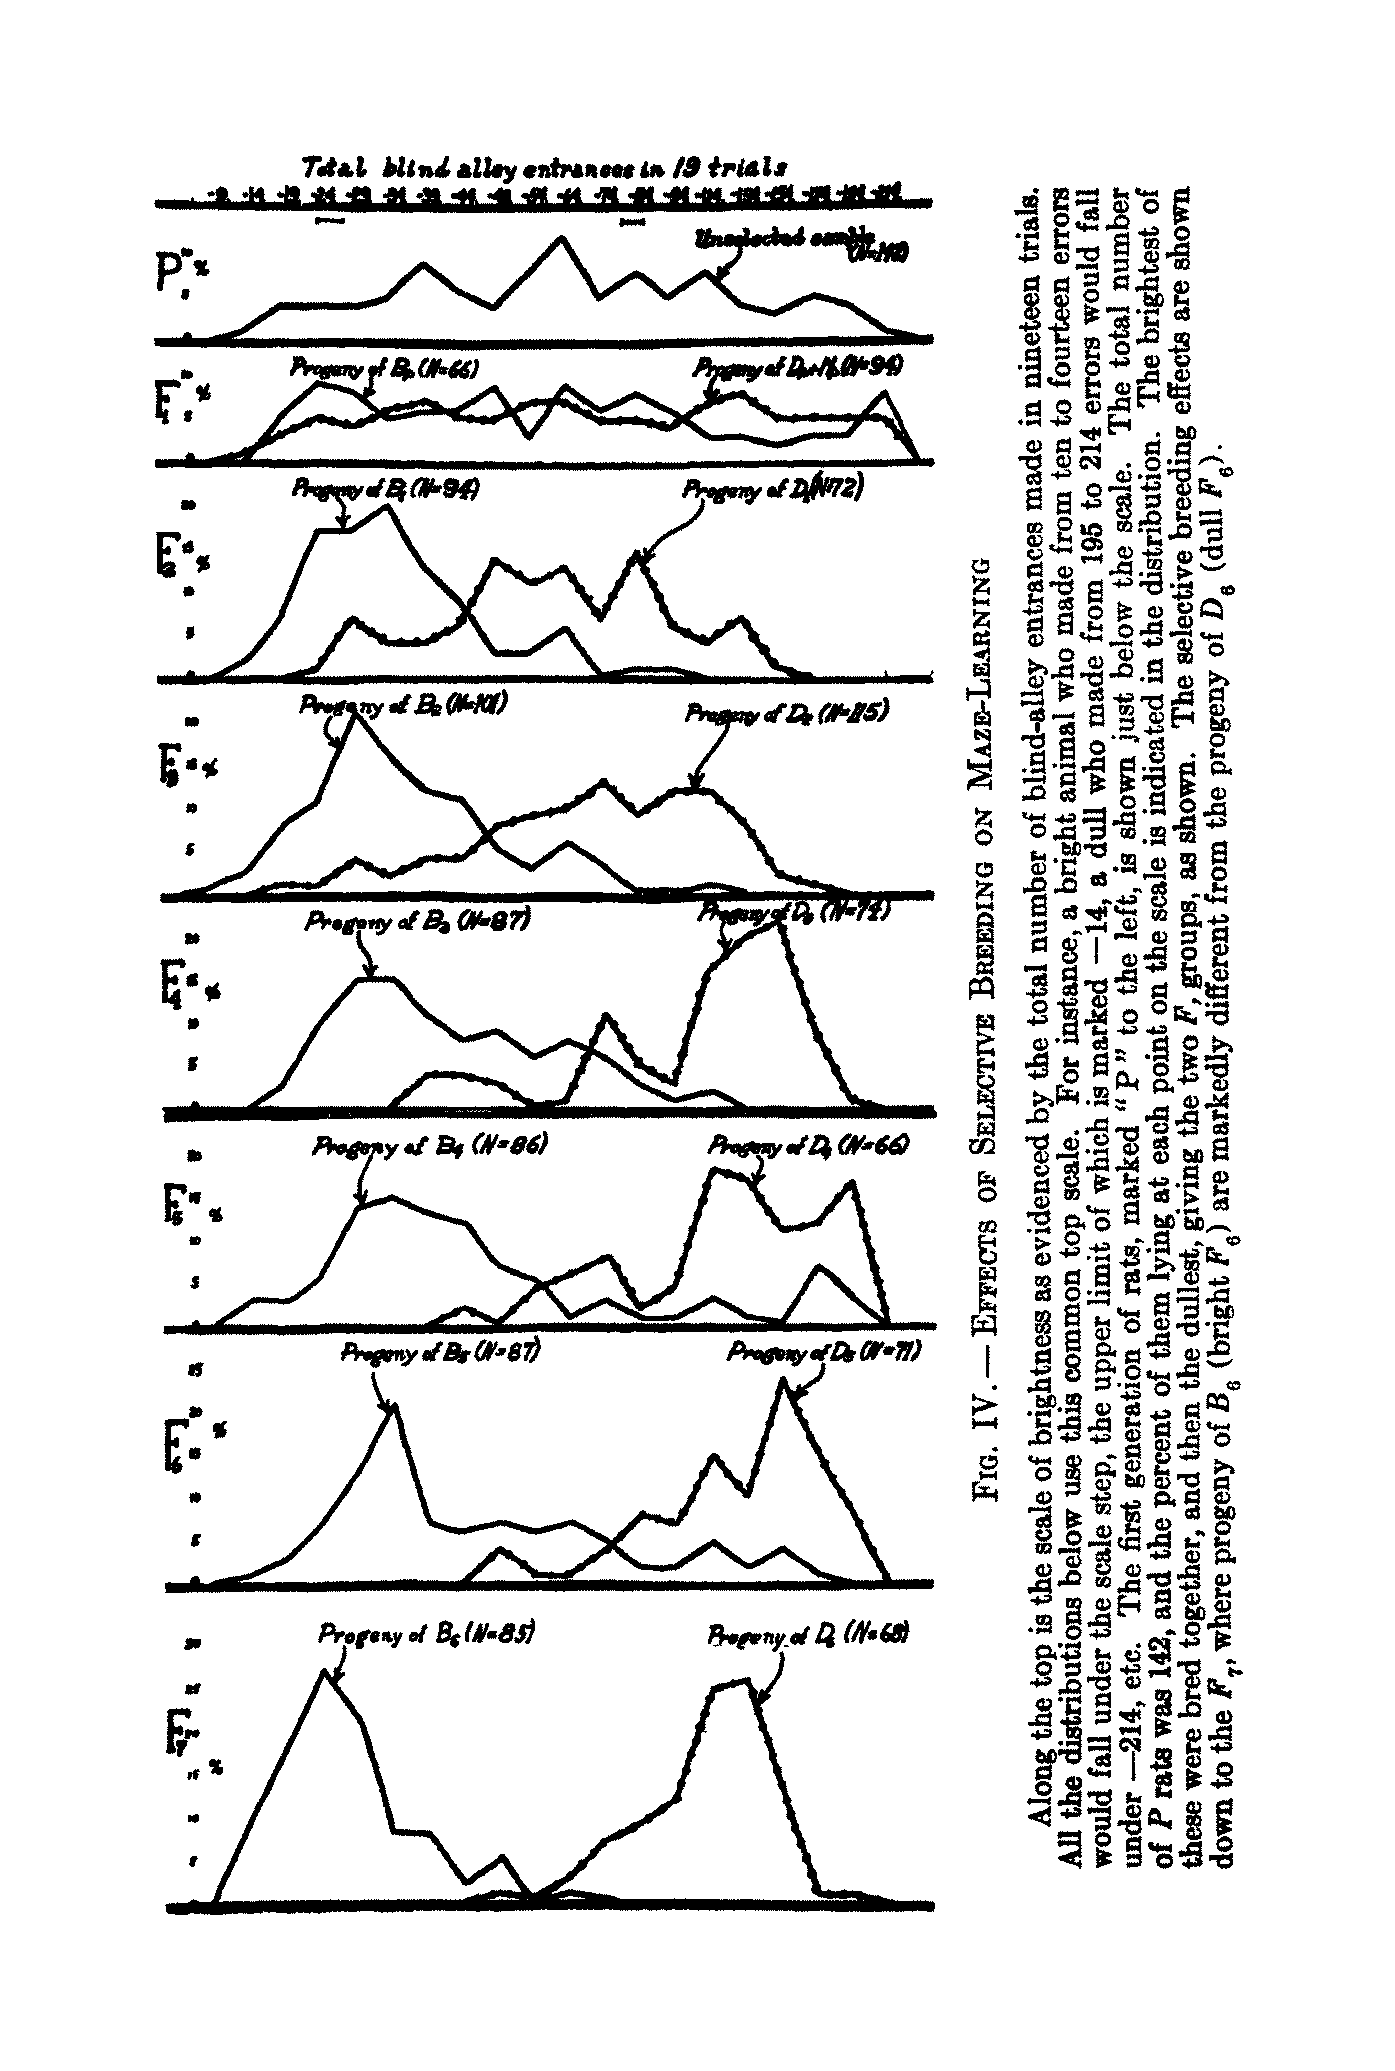 Figure 4 from Tryon 1940 showing near-complete divergence after 7 generations.